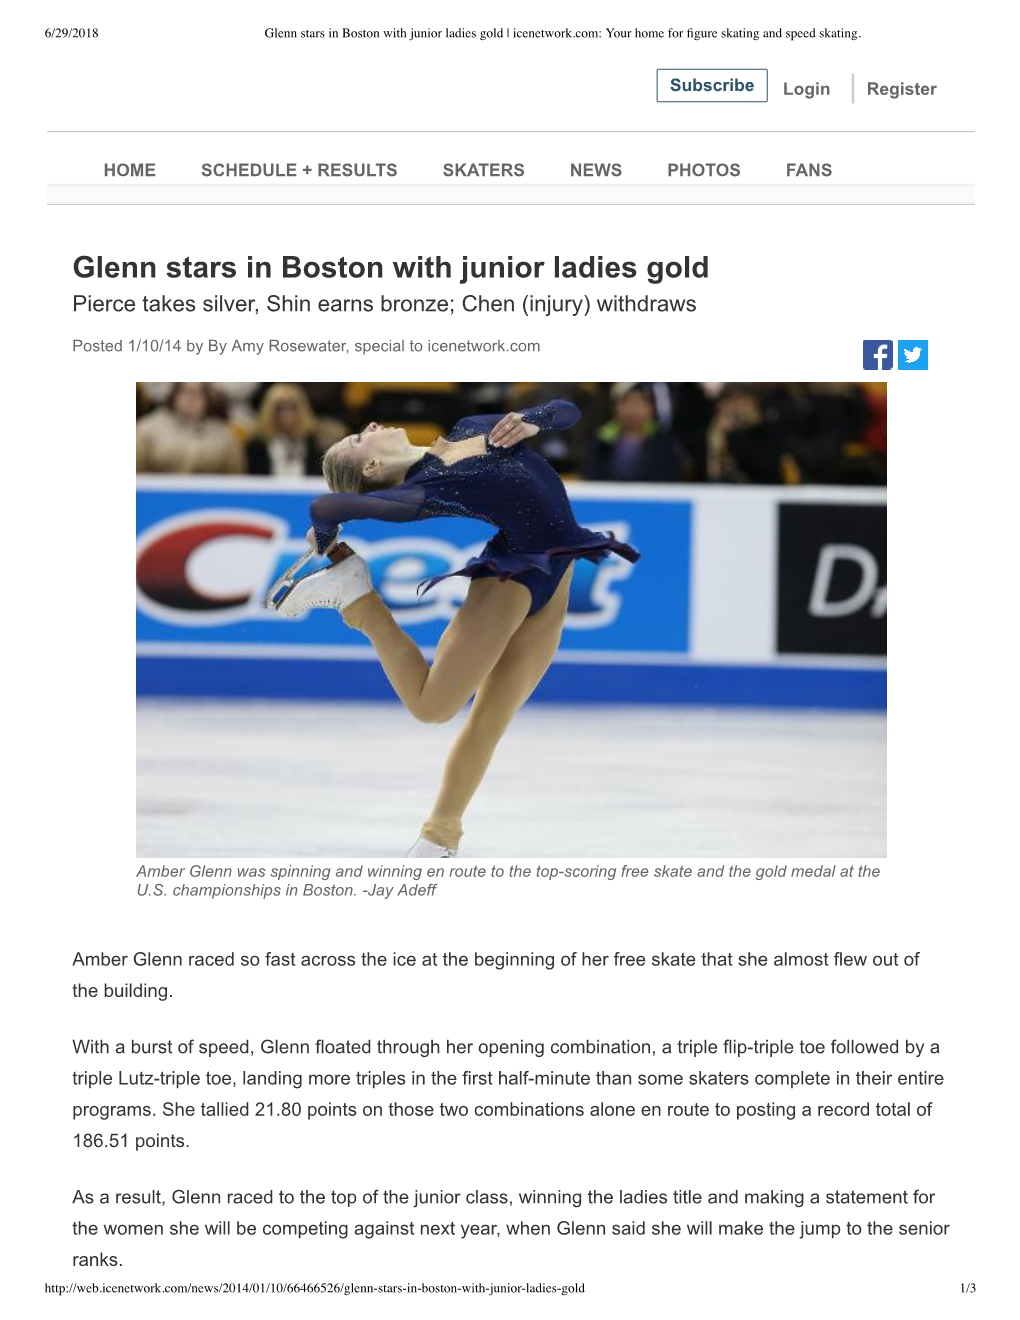 Glenn Stars in Boston with Junior Ladies Gold | Icenetwork.Com: Your Home for ﬁgure Skating and Speed Skating